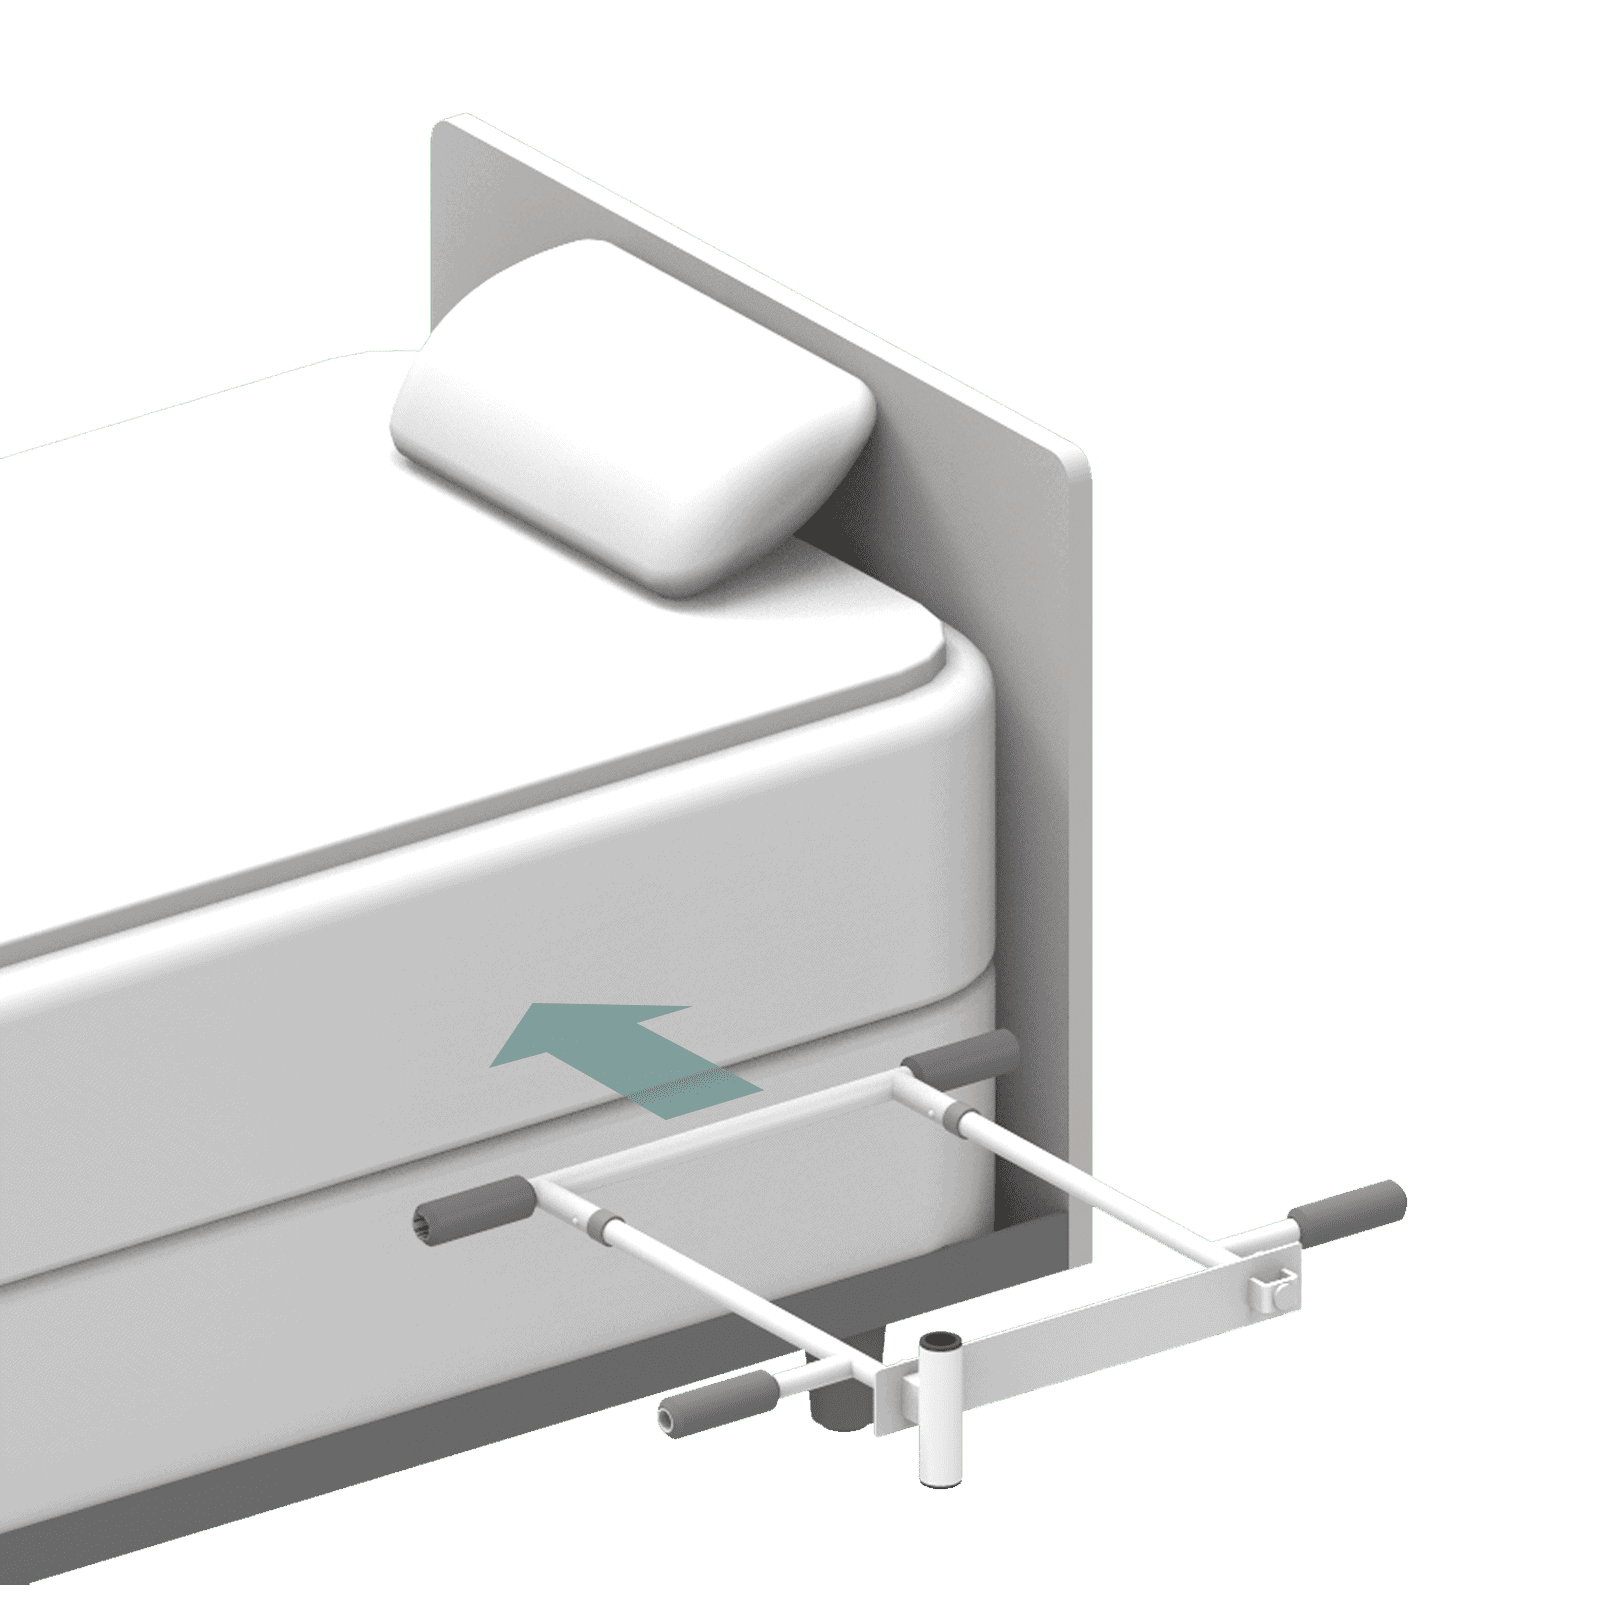 Bed-assist-smart-rail-feature-of-secure-install-between-matress-and-box-spring